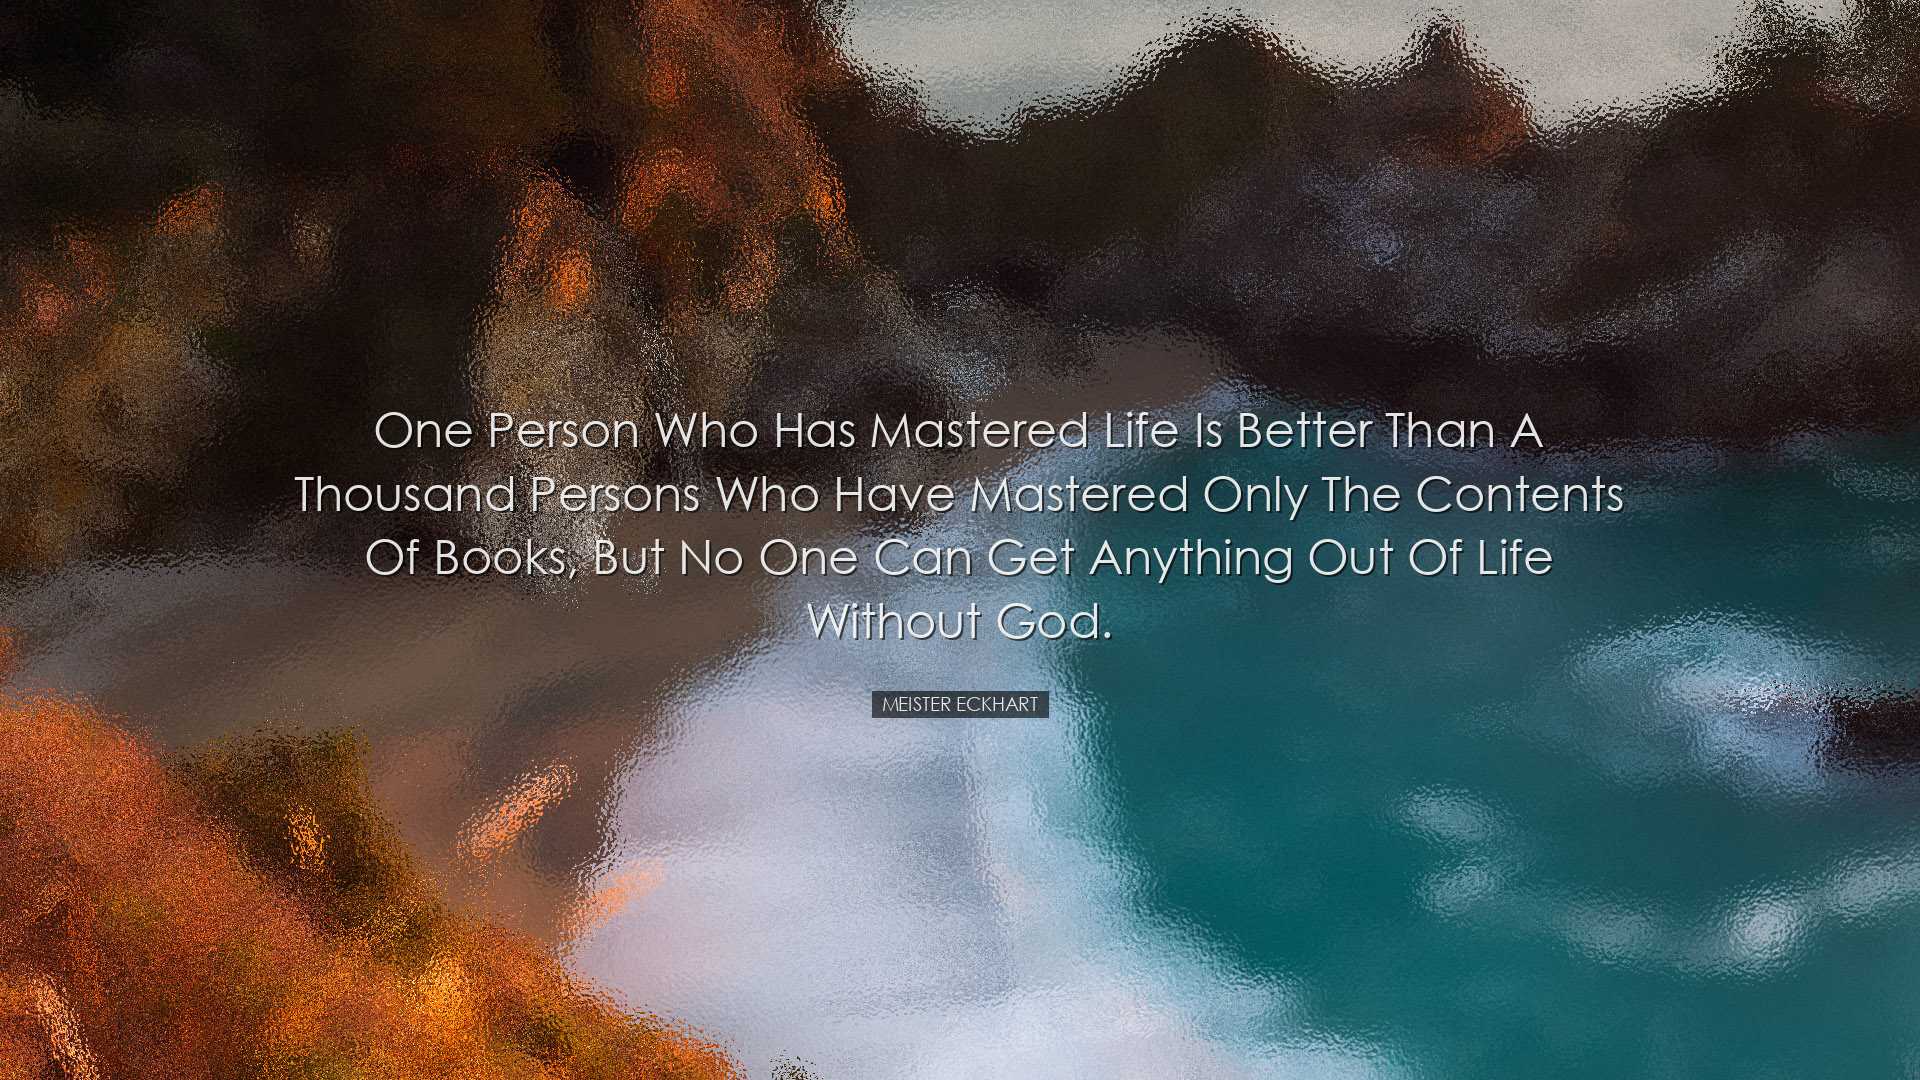 One person who has mastered life is better than a thousand persons